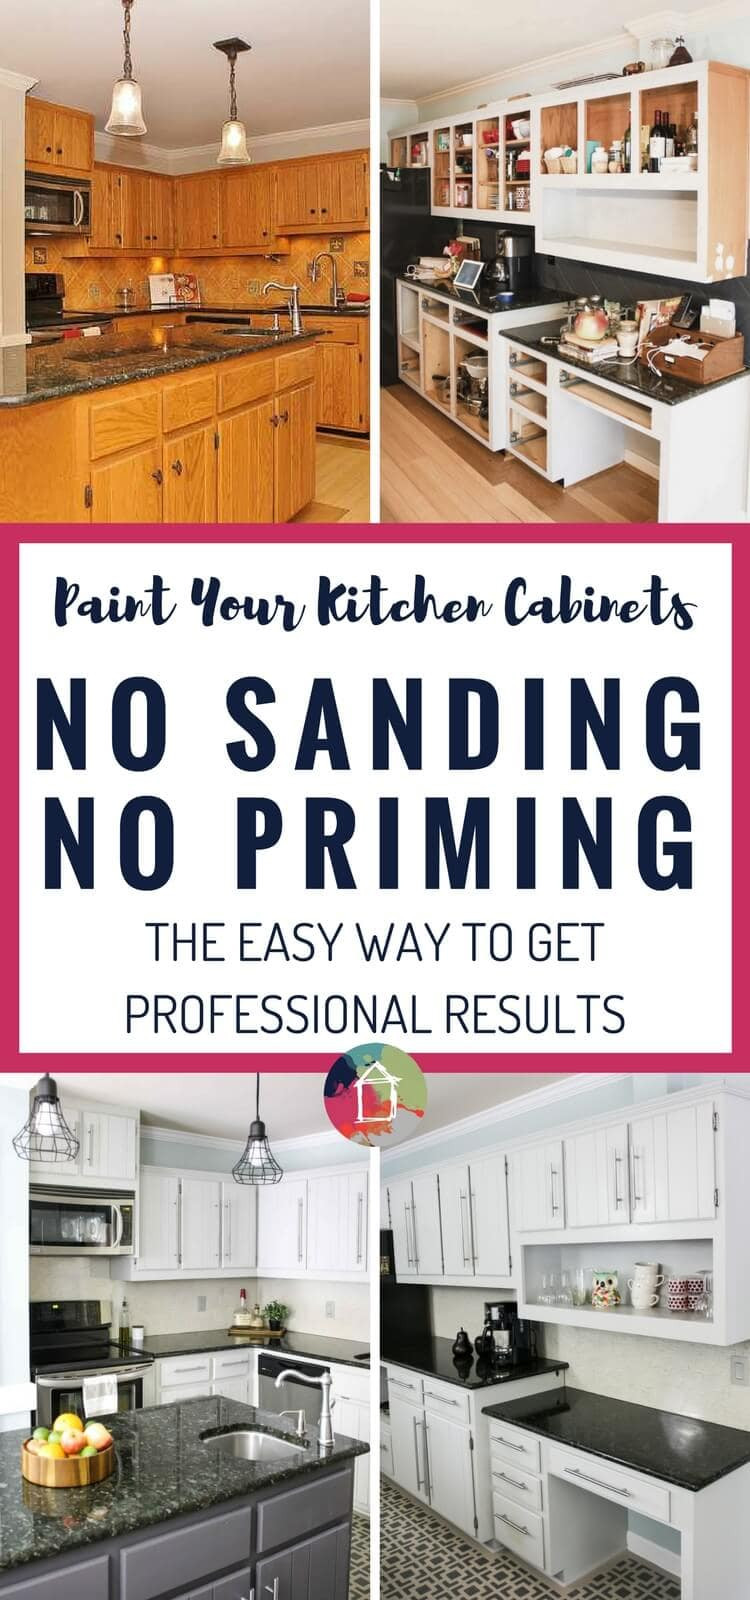 Paint Kitchen Cabinets Without Sanding
 How to Paint Kitchen Cabinets without sanding or priming